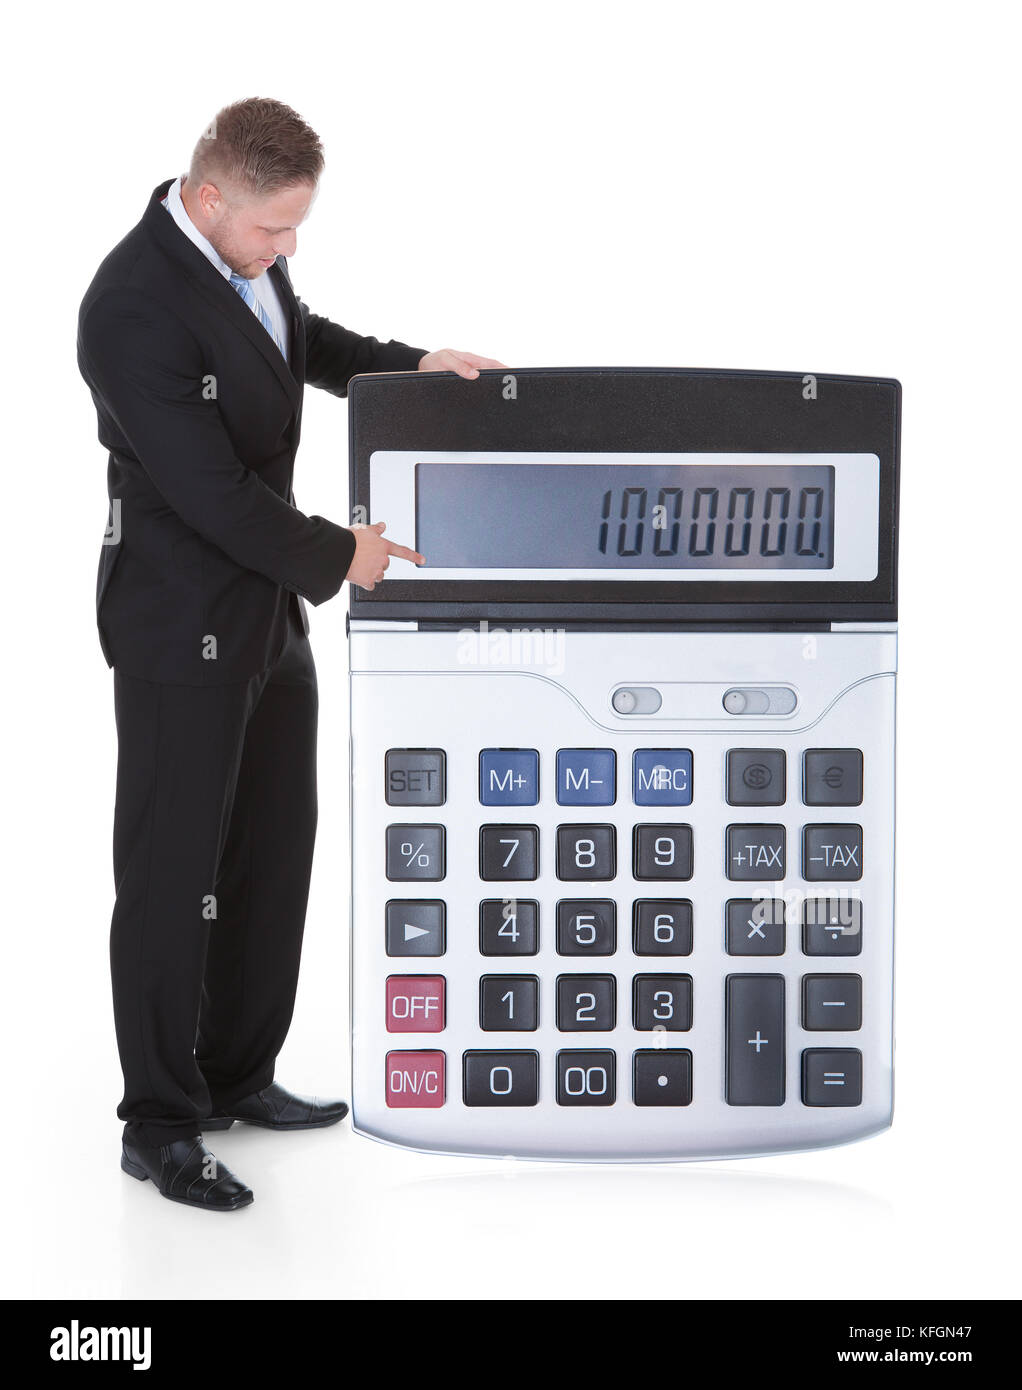 Smiling attractive businessman in a suit displaying a an oversized calculator with the keypad towards the camera  conceptual financial image isolated  Stock Photo